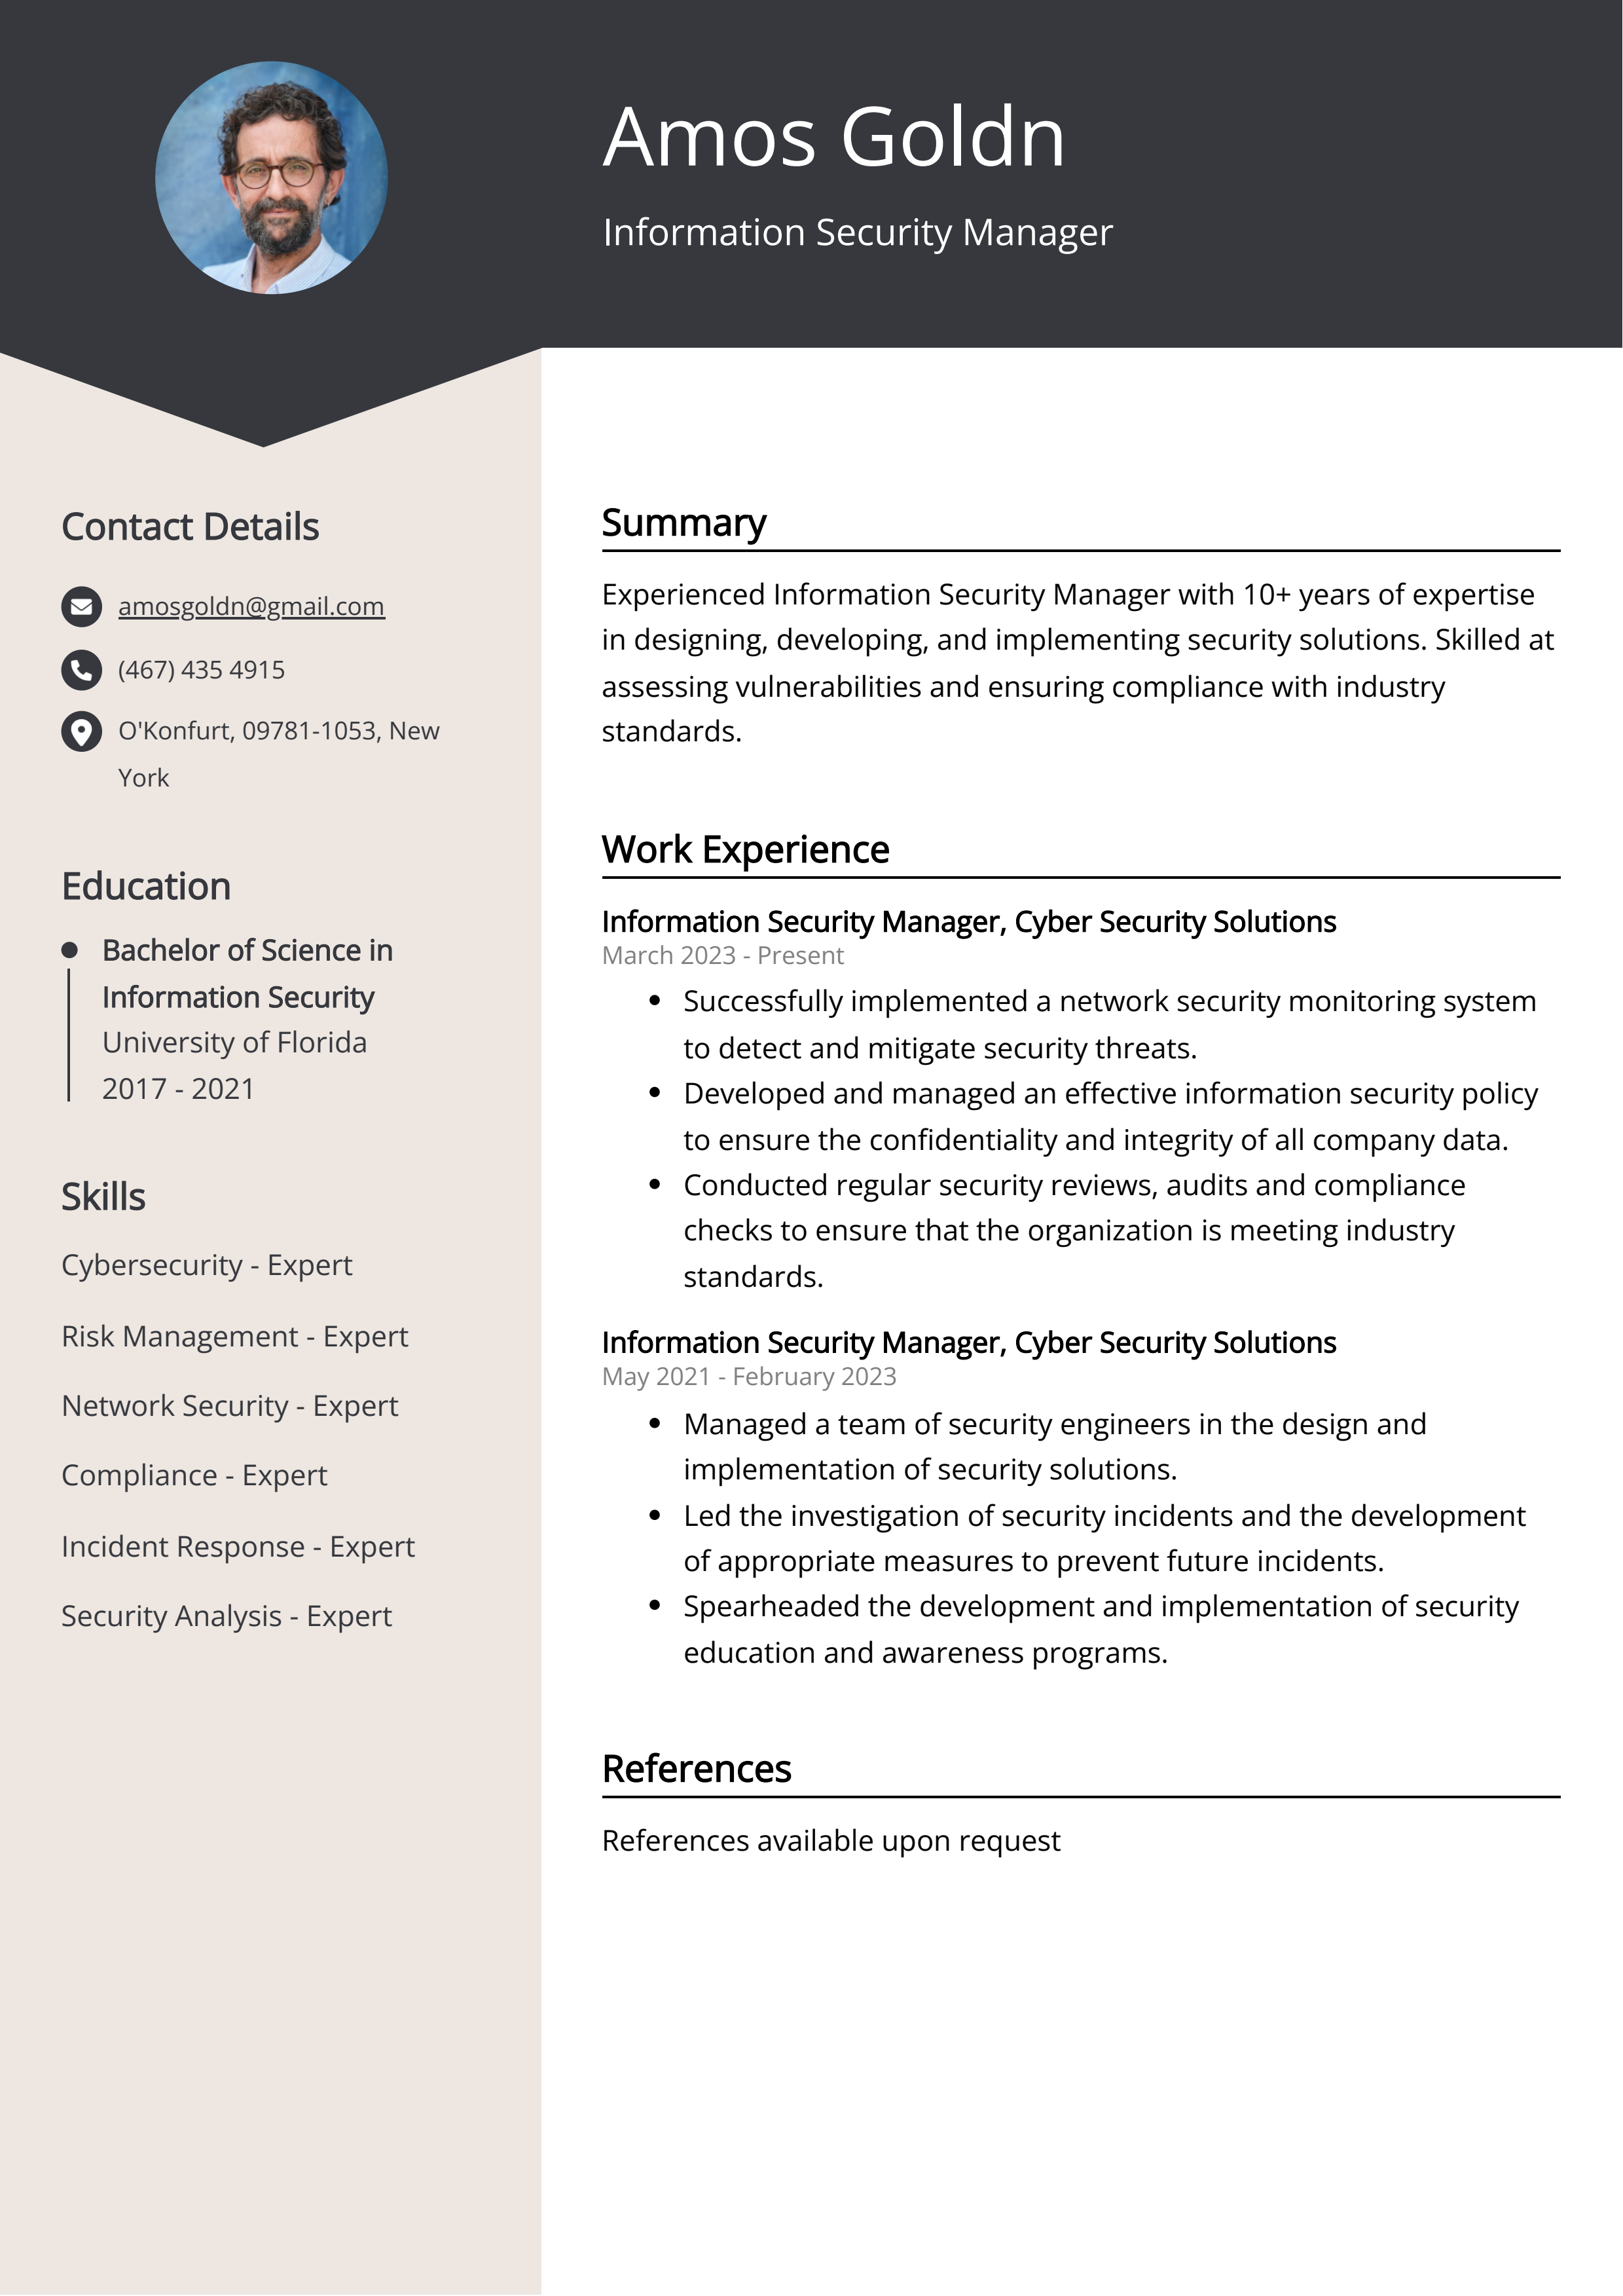 Information Security Manager CV Example